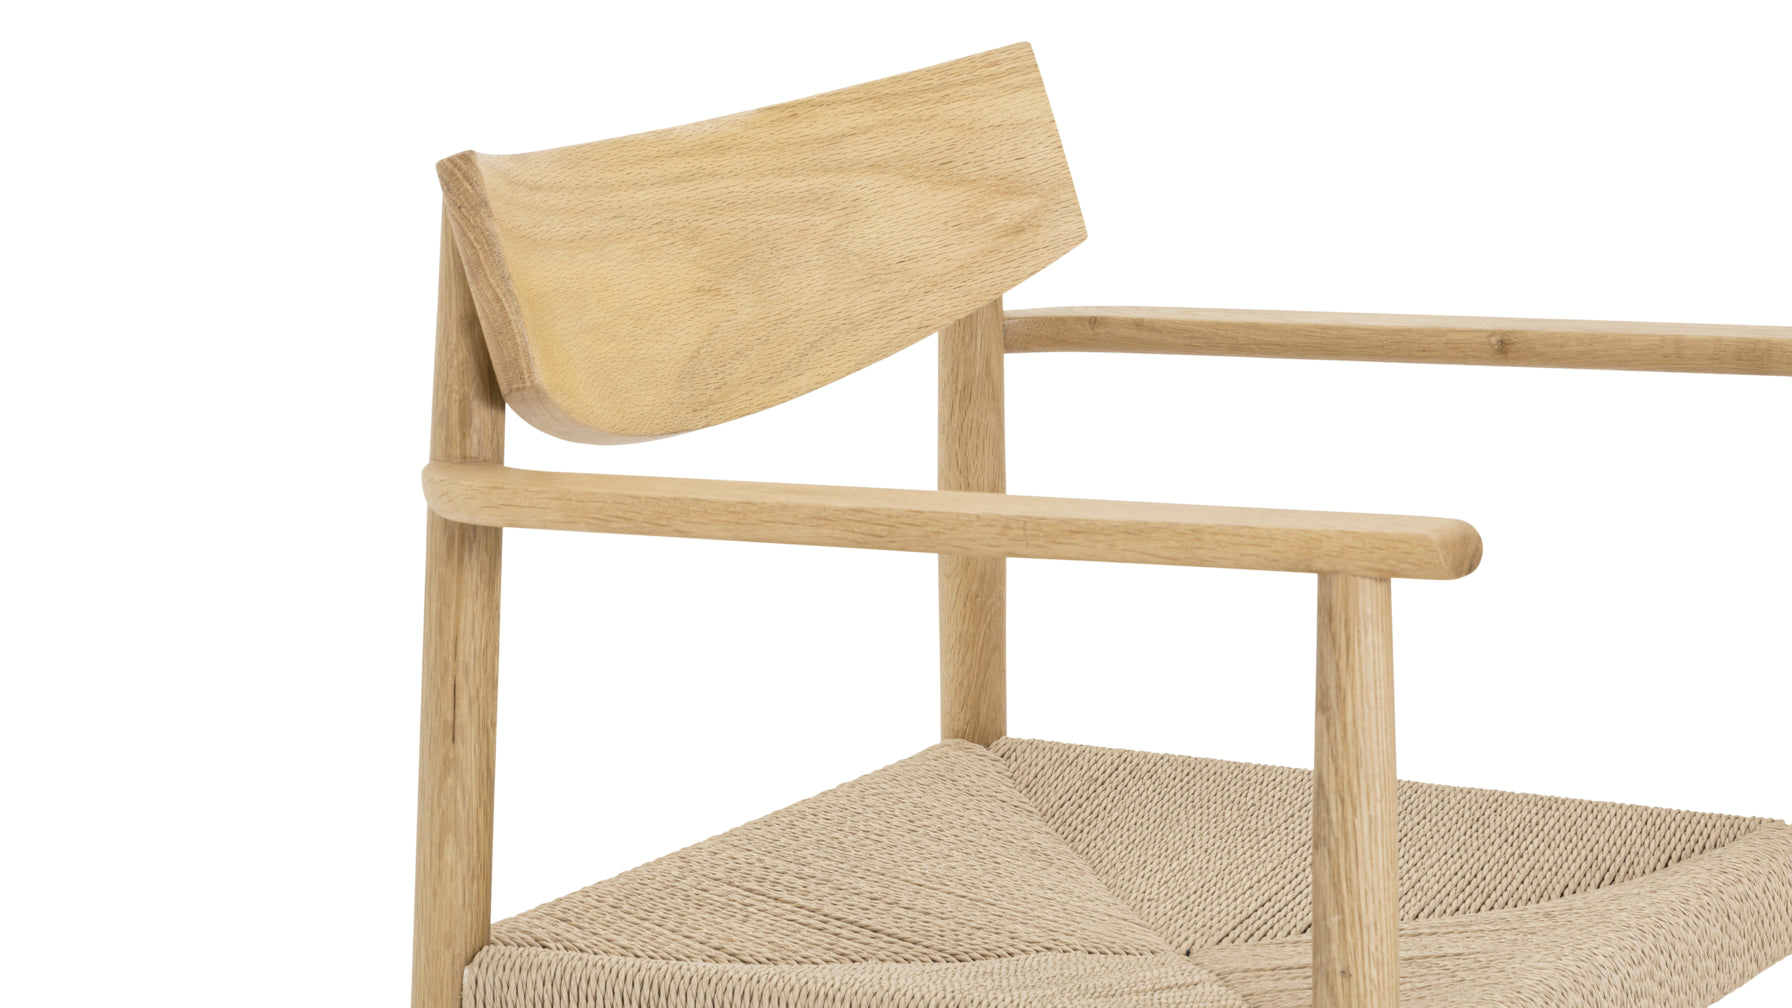 Dinner Guest Dining Chair, White Oak/ Natural Papercord Seat - Image 8